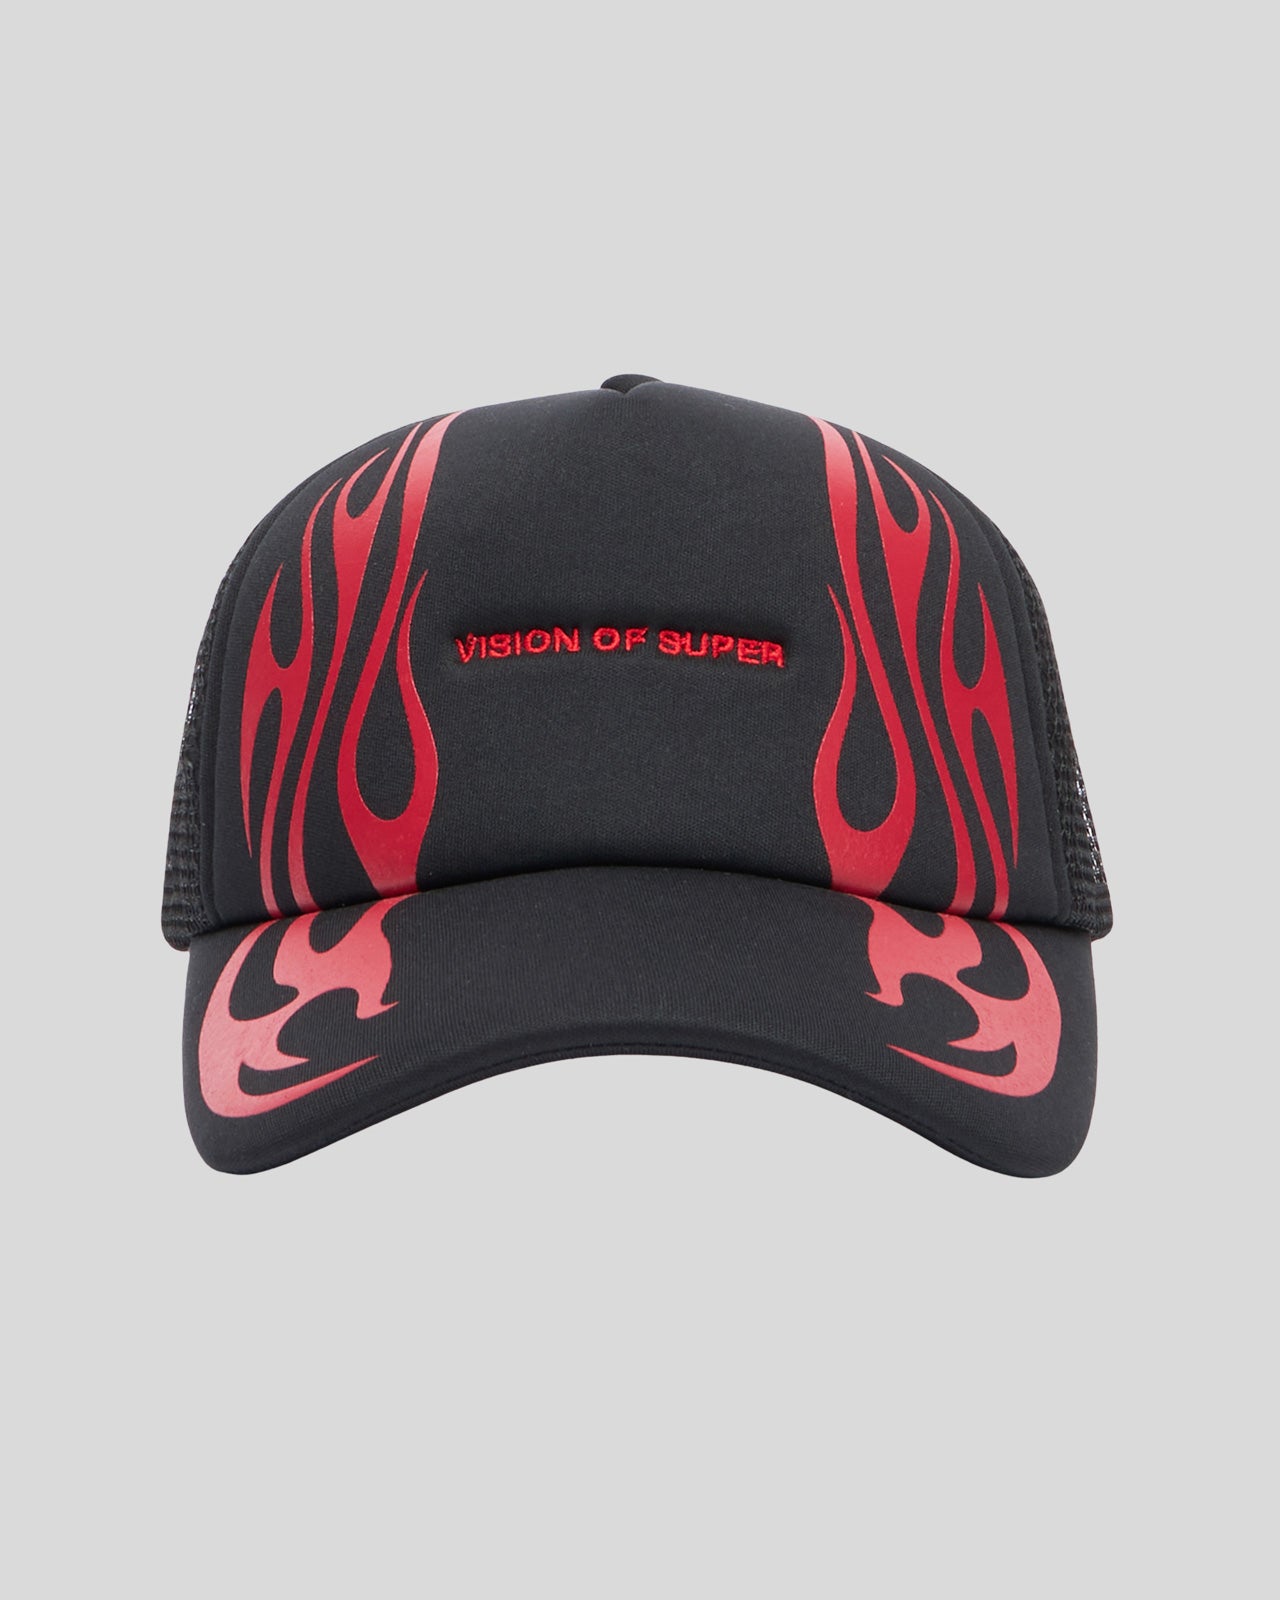 BLACK TRACKER CAP WITH TRIBAL FLAMES